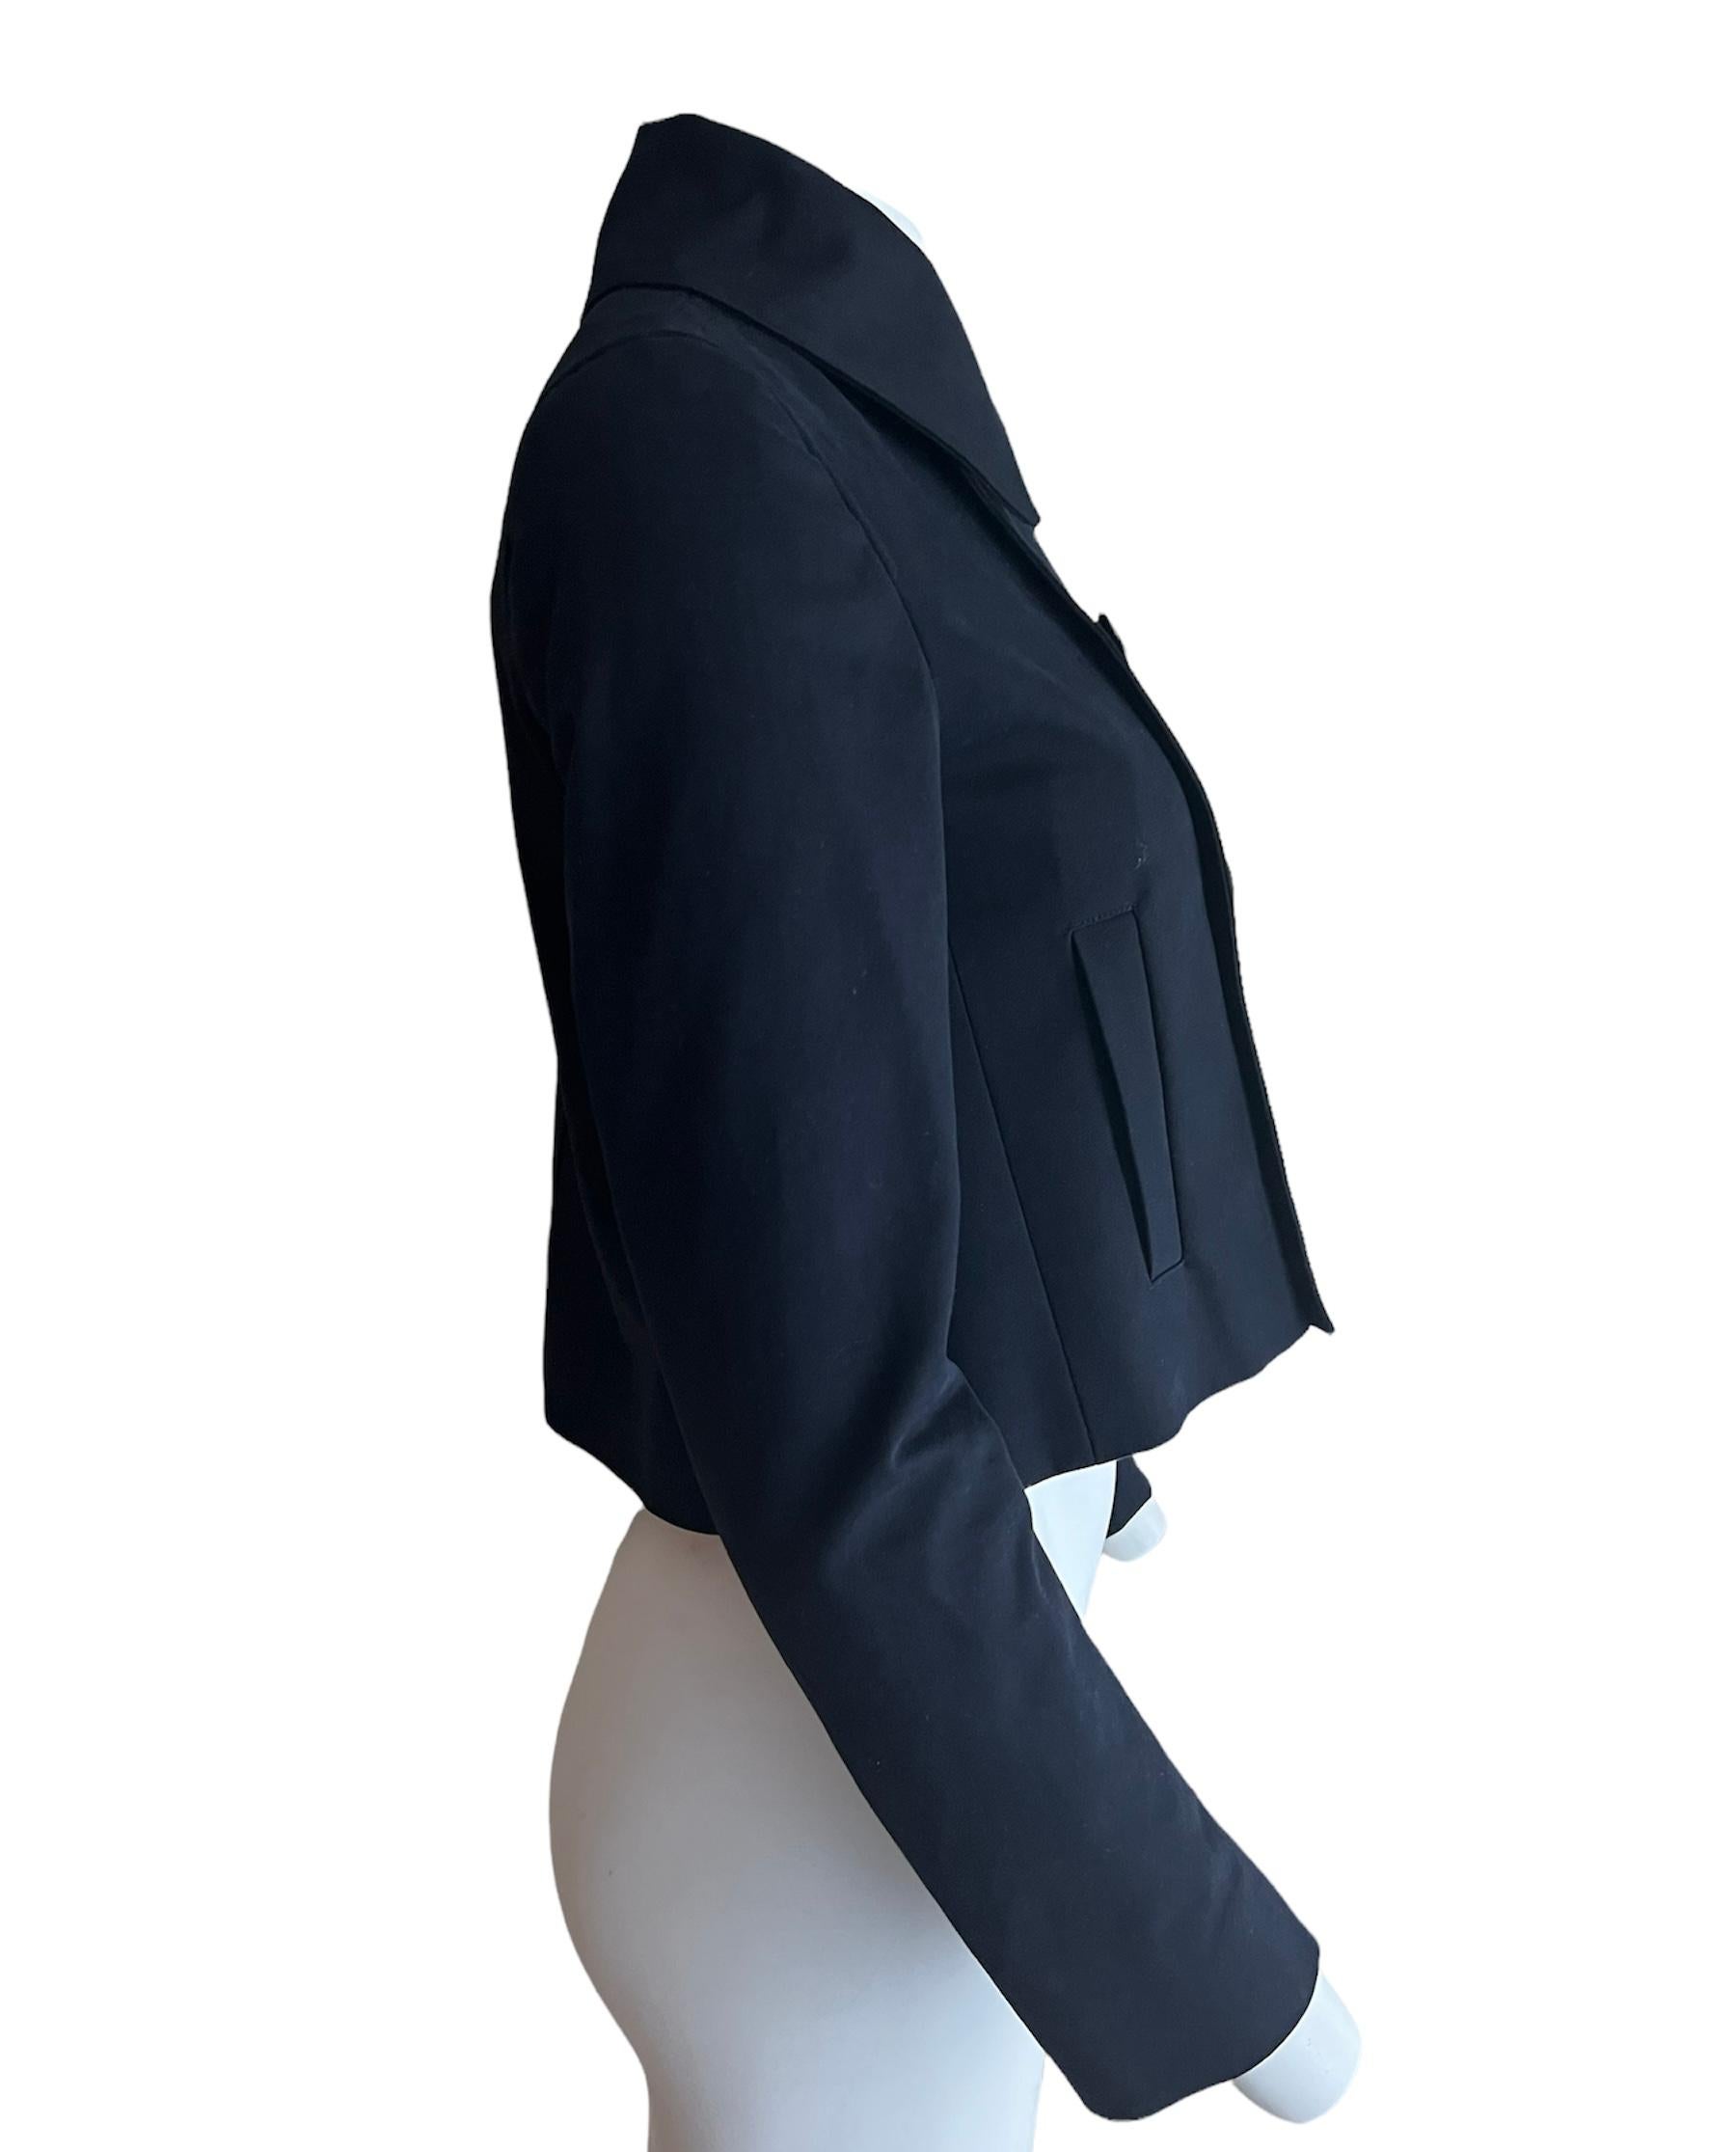 Ralph Laurent Navy Blazer Jacket, Size 4 In Excellent Condition For Sale In Beverly Hills, CA